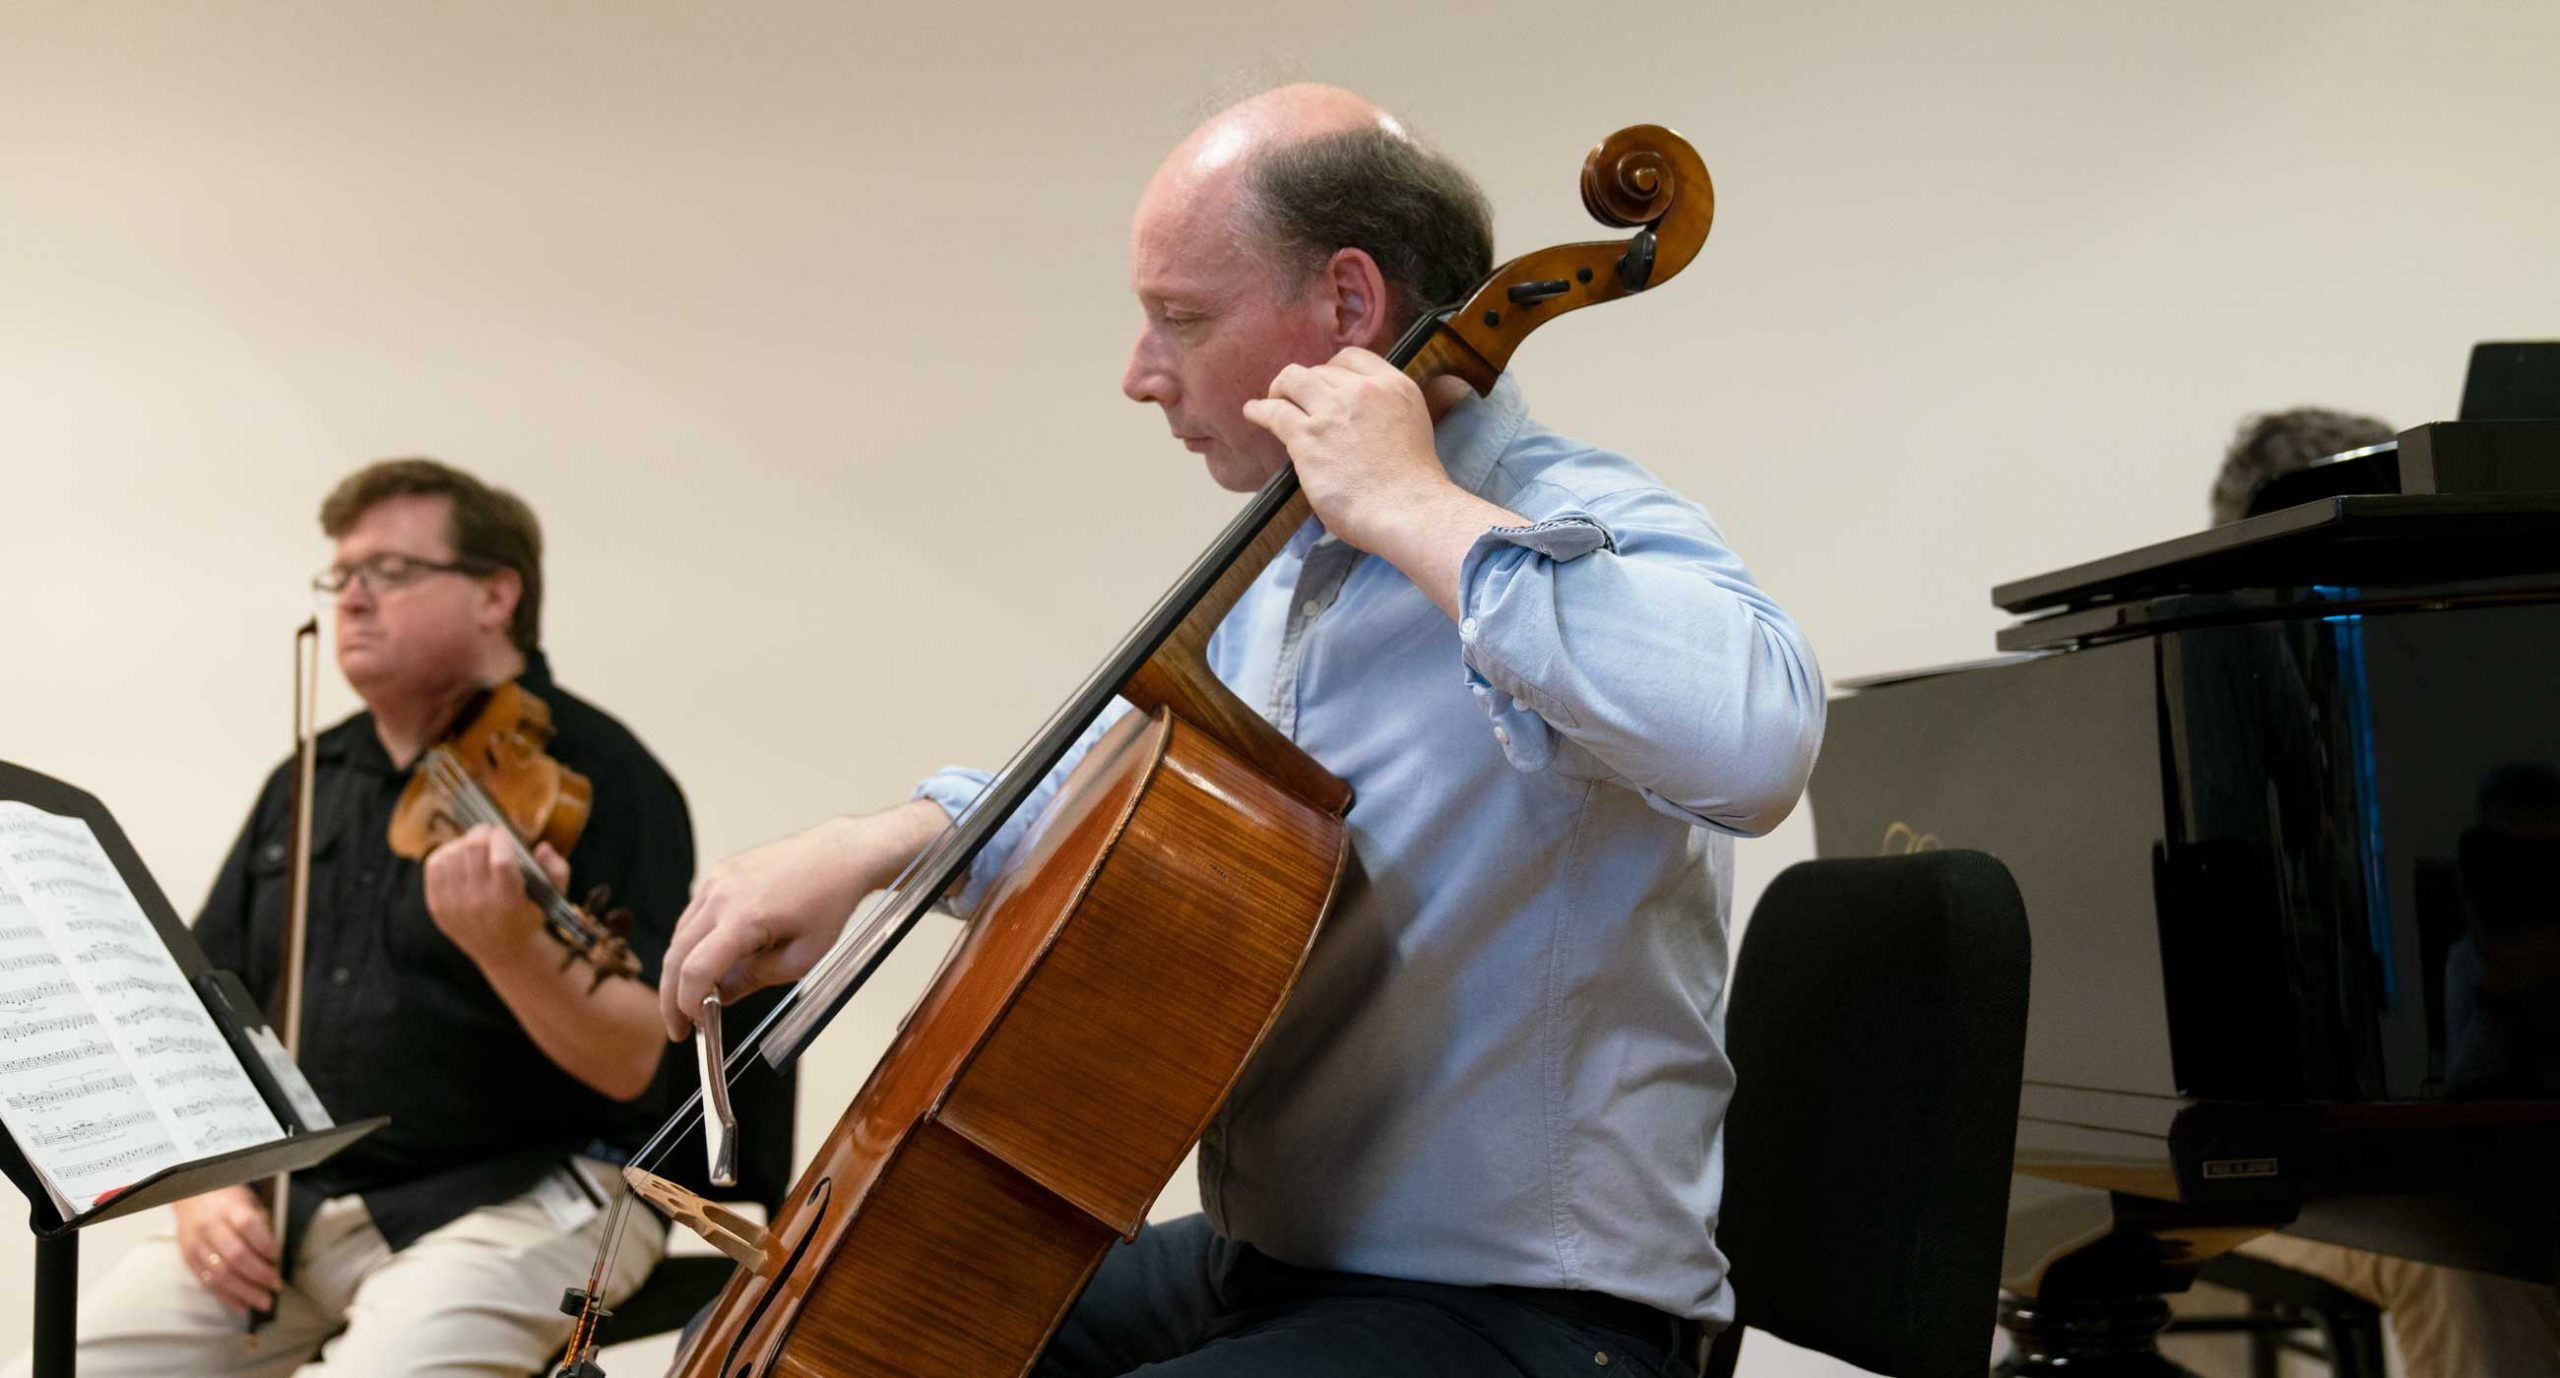 Clive Greensmith playing cello next to a piano with violinist in background